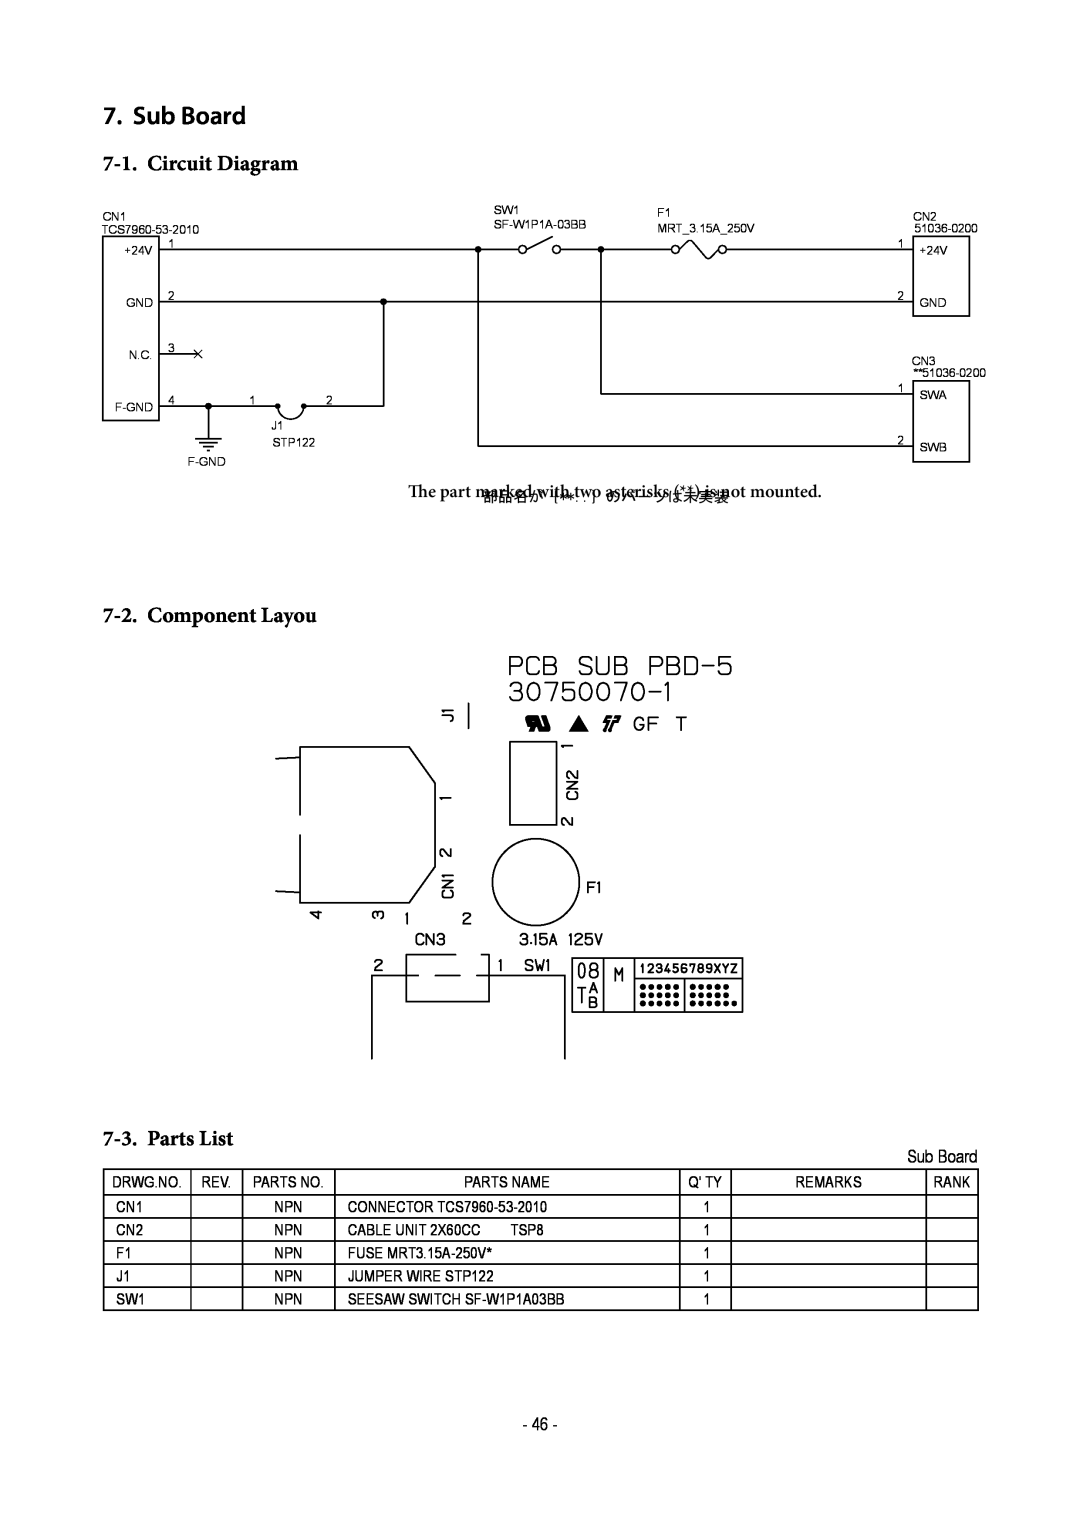 Star Micronics TUP500 technical manual Sub Board, Circuit Diagram, Component Layou, Parts List 